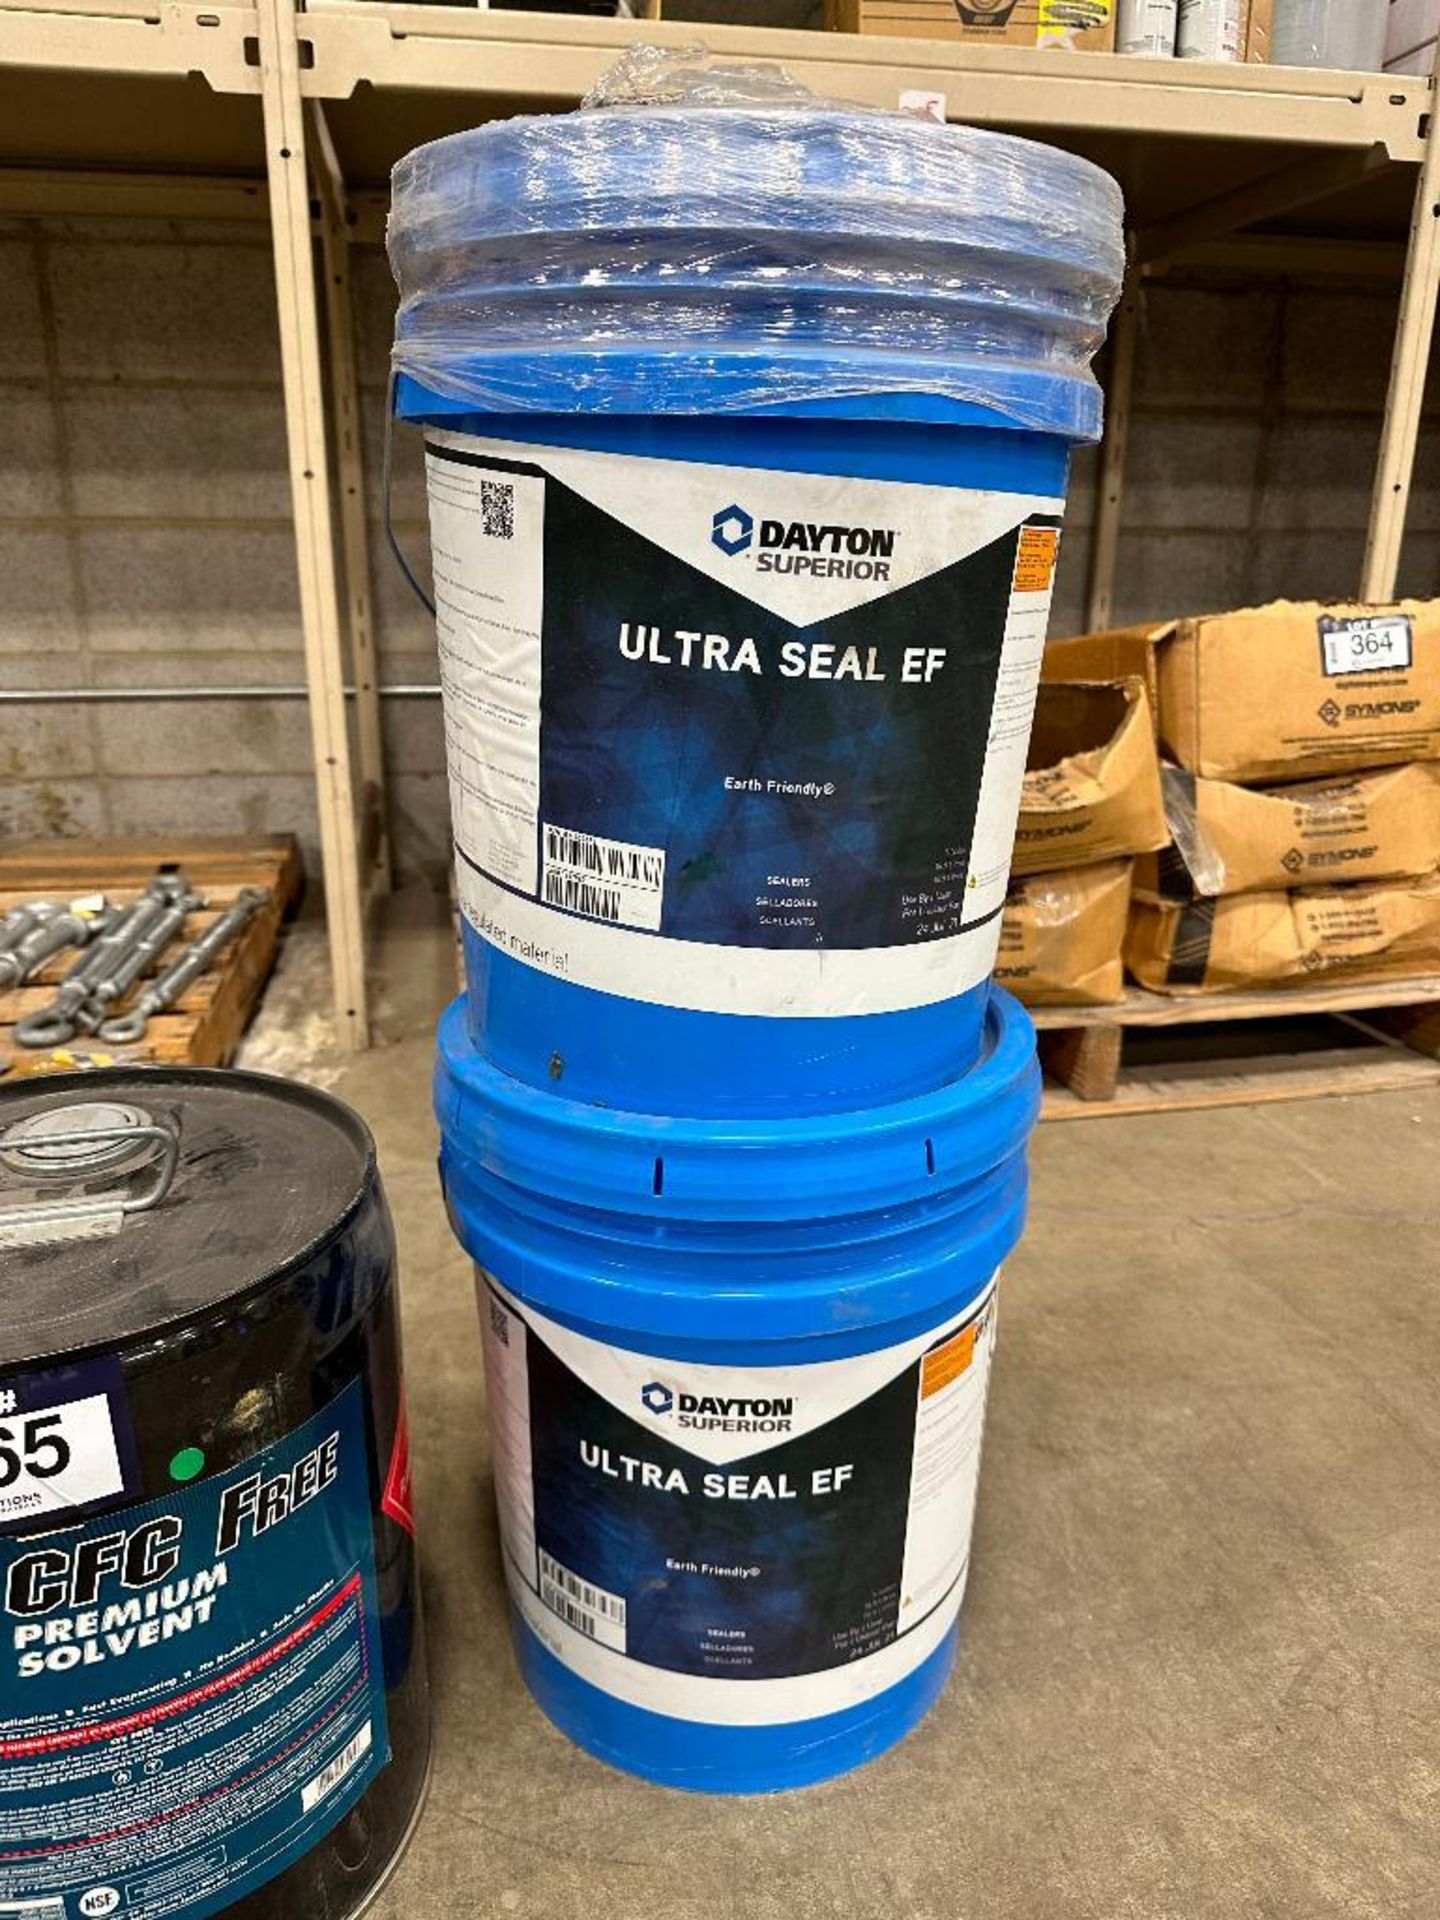 Lot of (2) Pails of Dayton Superior Seal and (1) Pail of LPS Solvent - Image 2 of 3